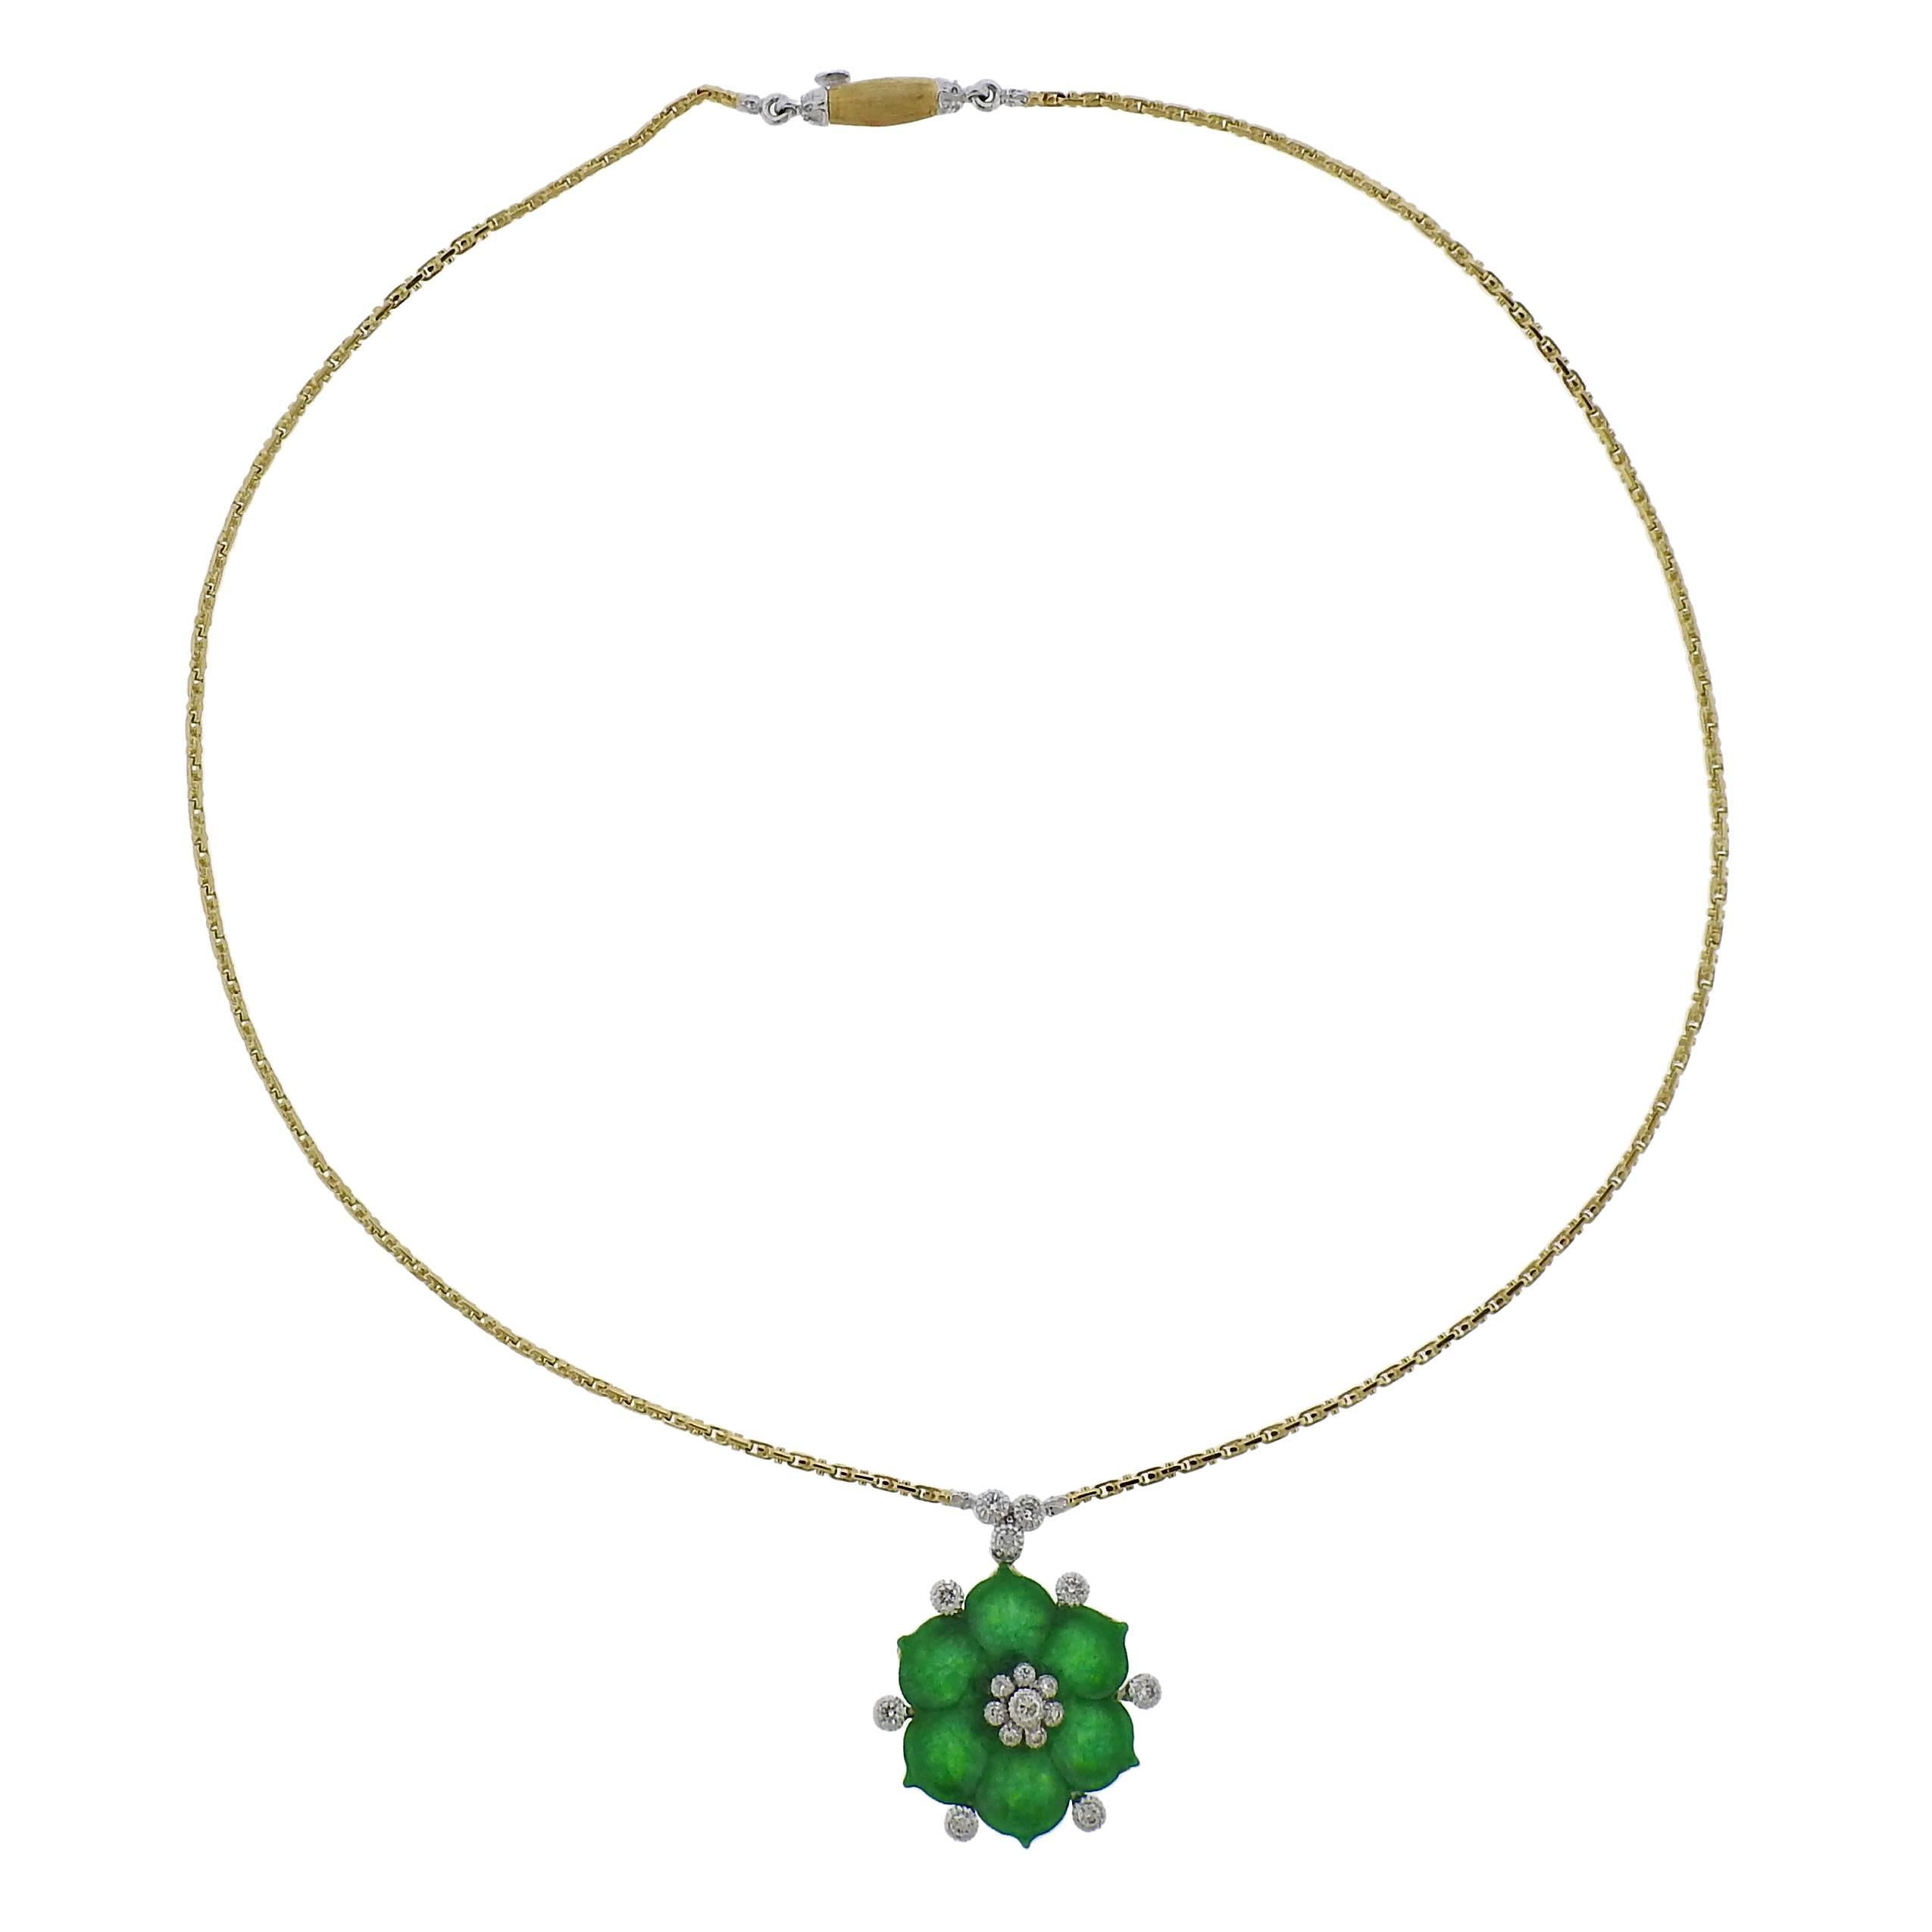 An 18K yellow and white gold necklace from Buccellati features a jade pendant decorated in diamonds. Necklace is 16" long, pendant measures 30mm long x 26mm wide. Marked Buccellati, Italy, 18k, R5998. Weighs 12.4 grams. Necklace comes with